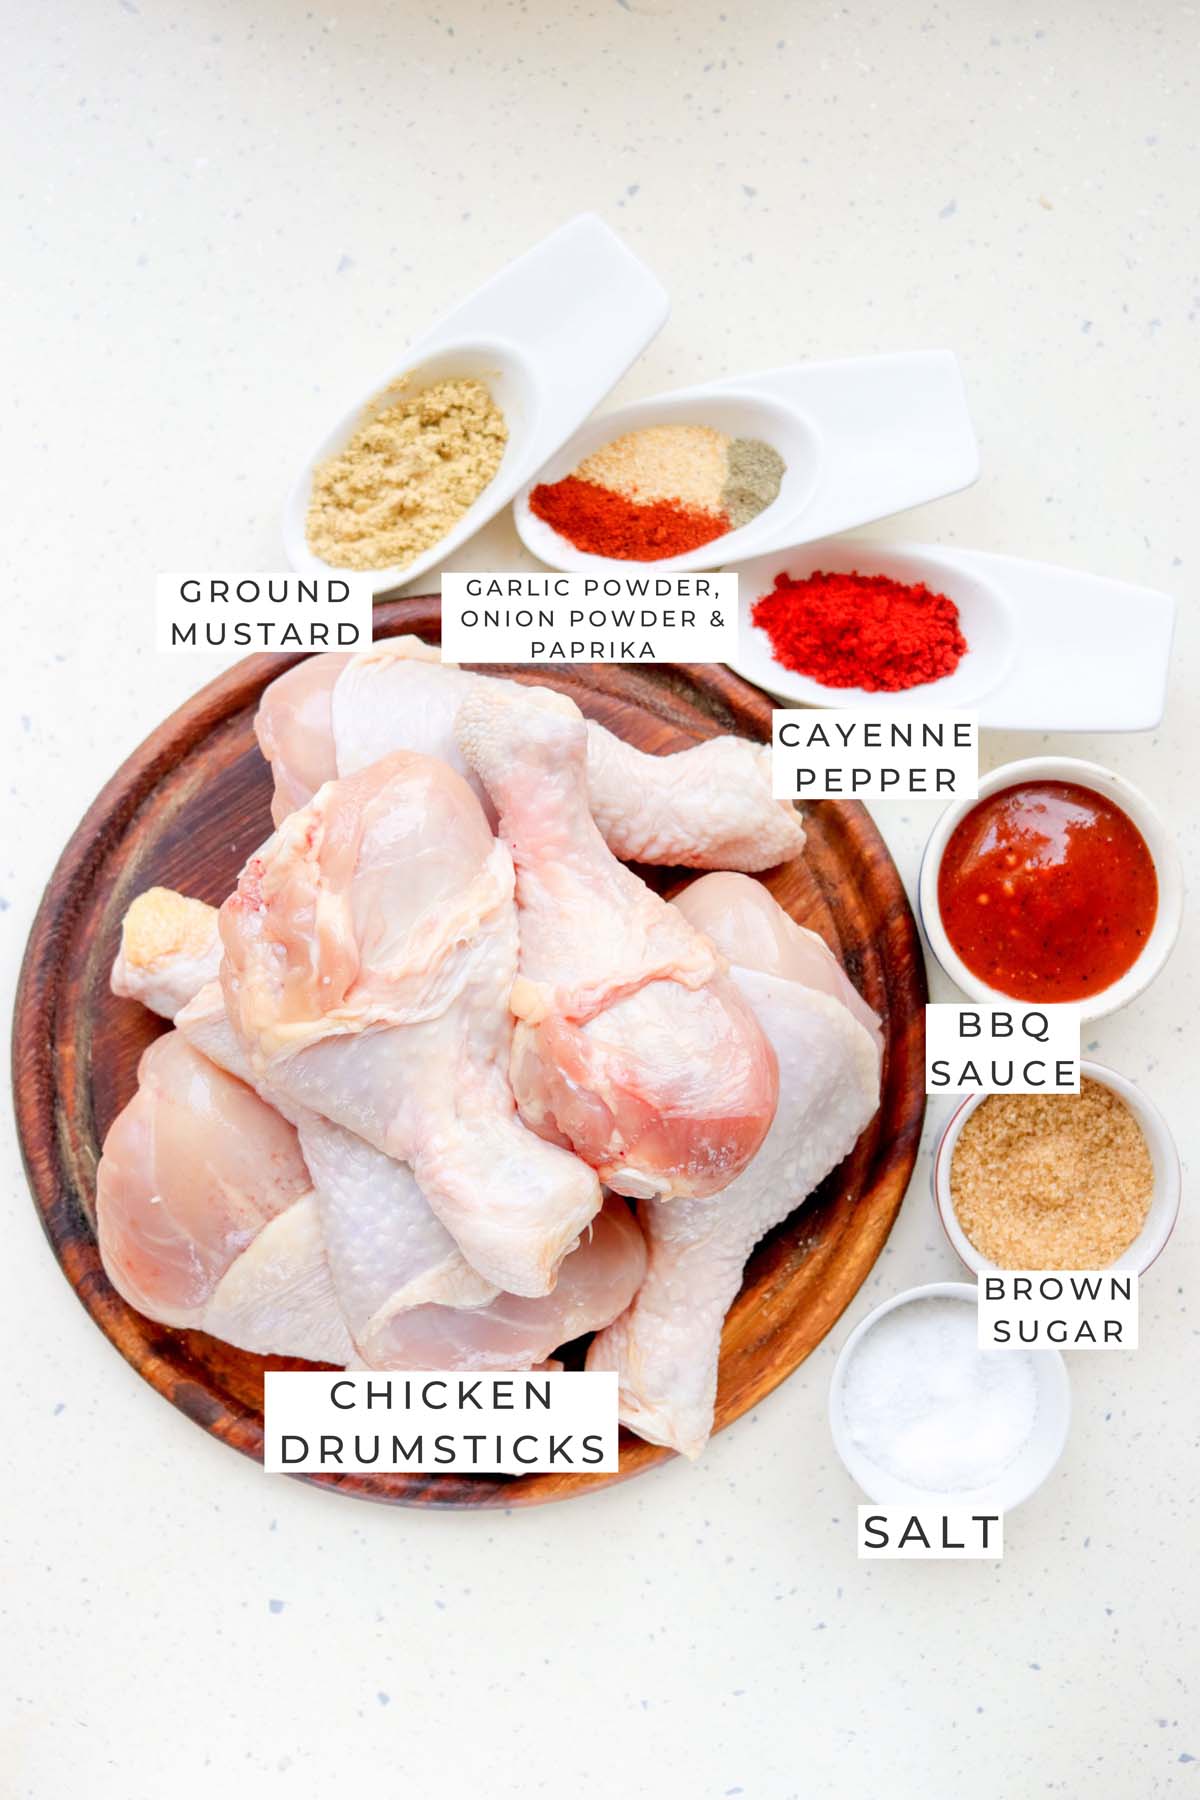 Labeled ingredients for the drumsticks.